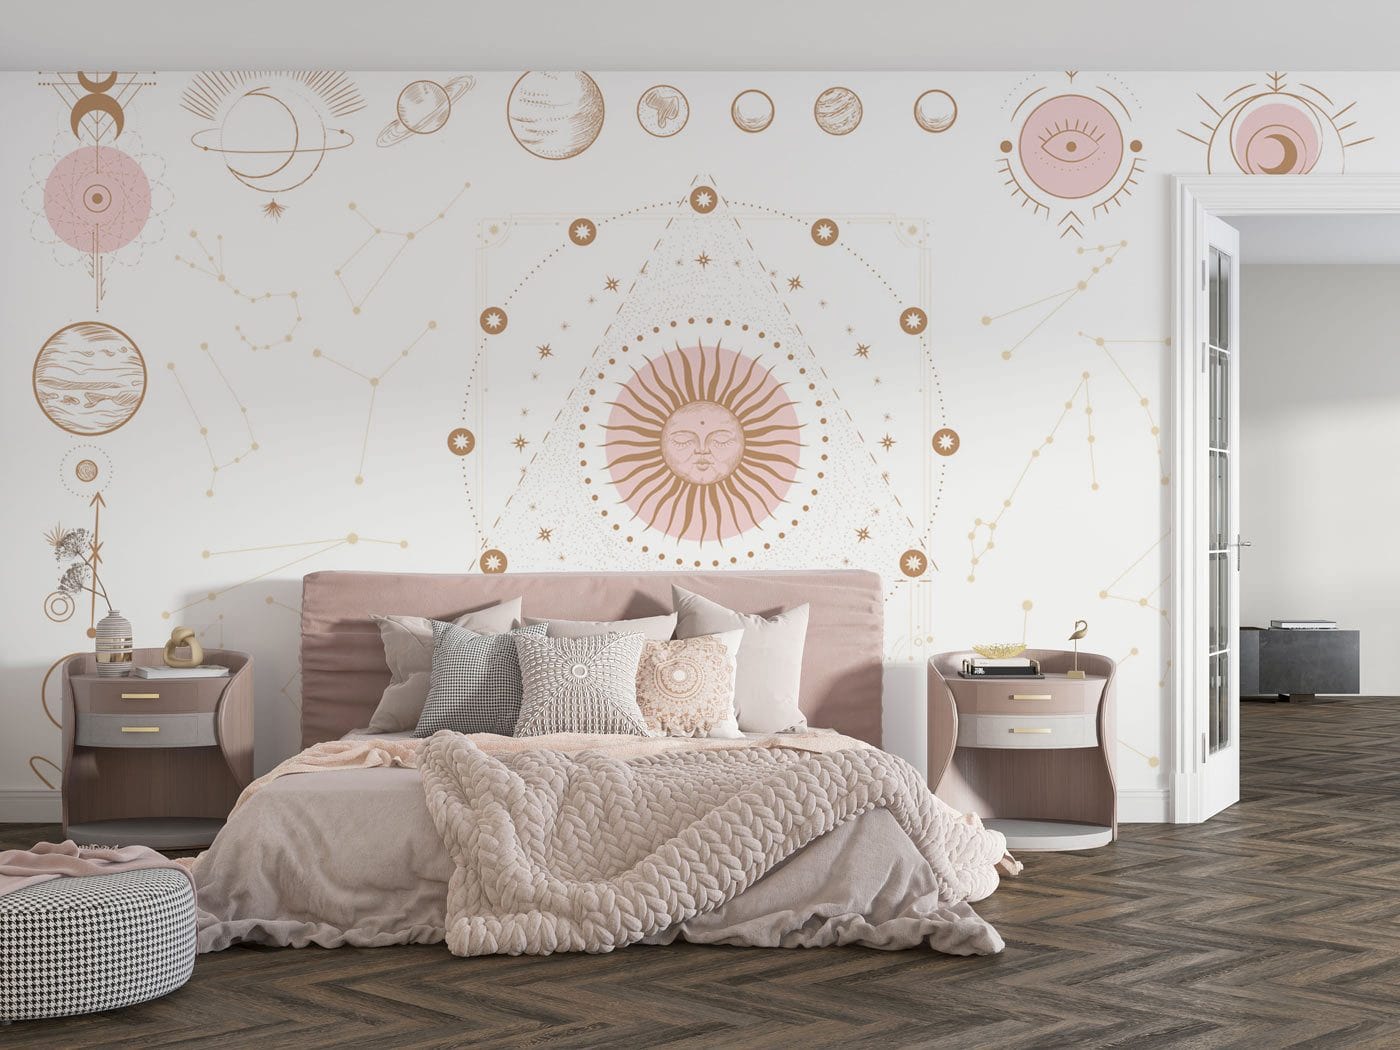 Planet Art Pattern Wallpaper Mural for Use in Decorating a Bedroom